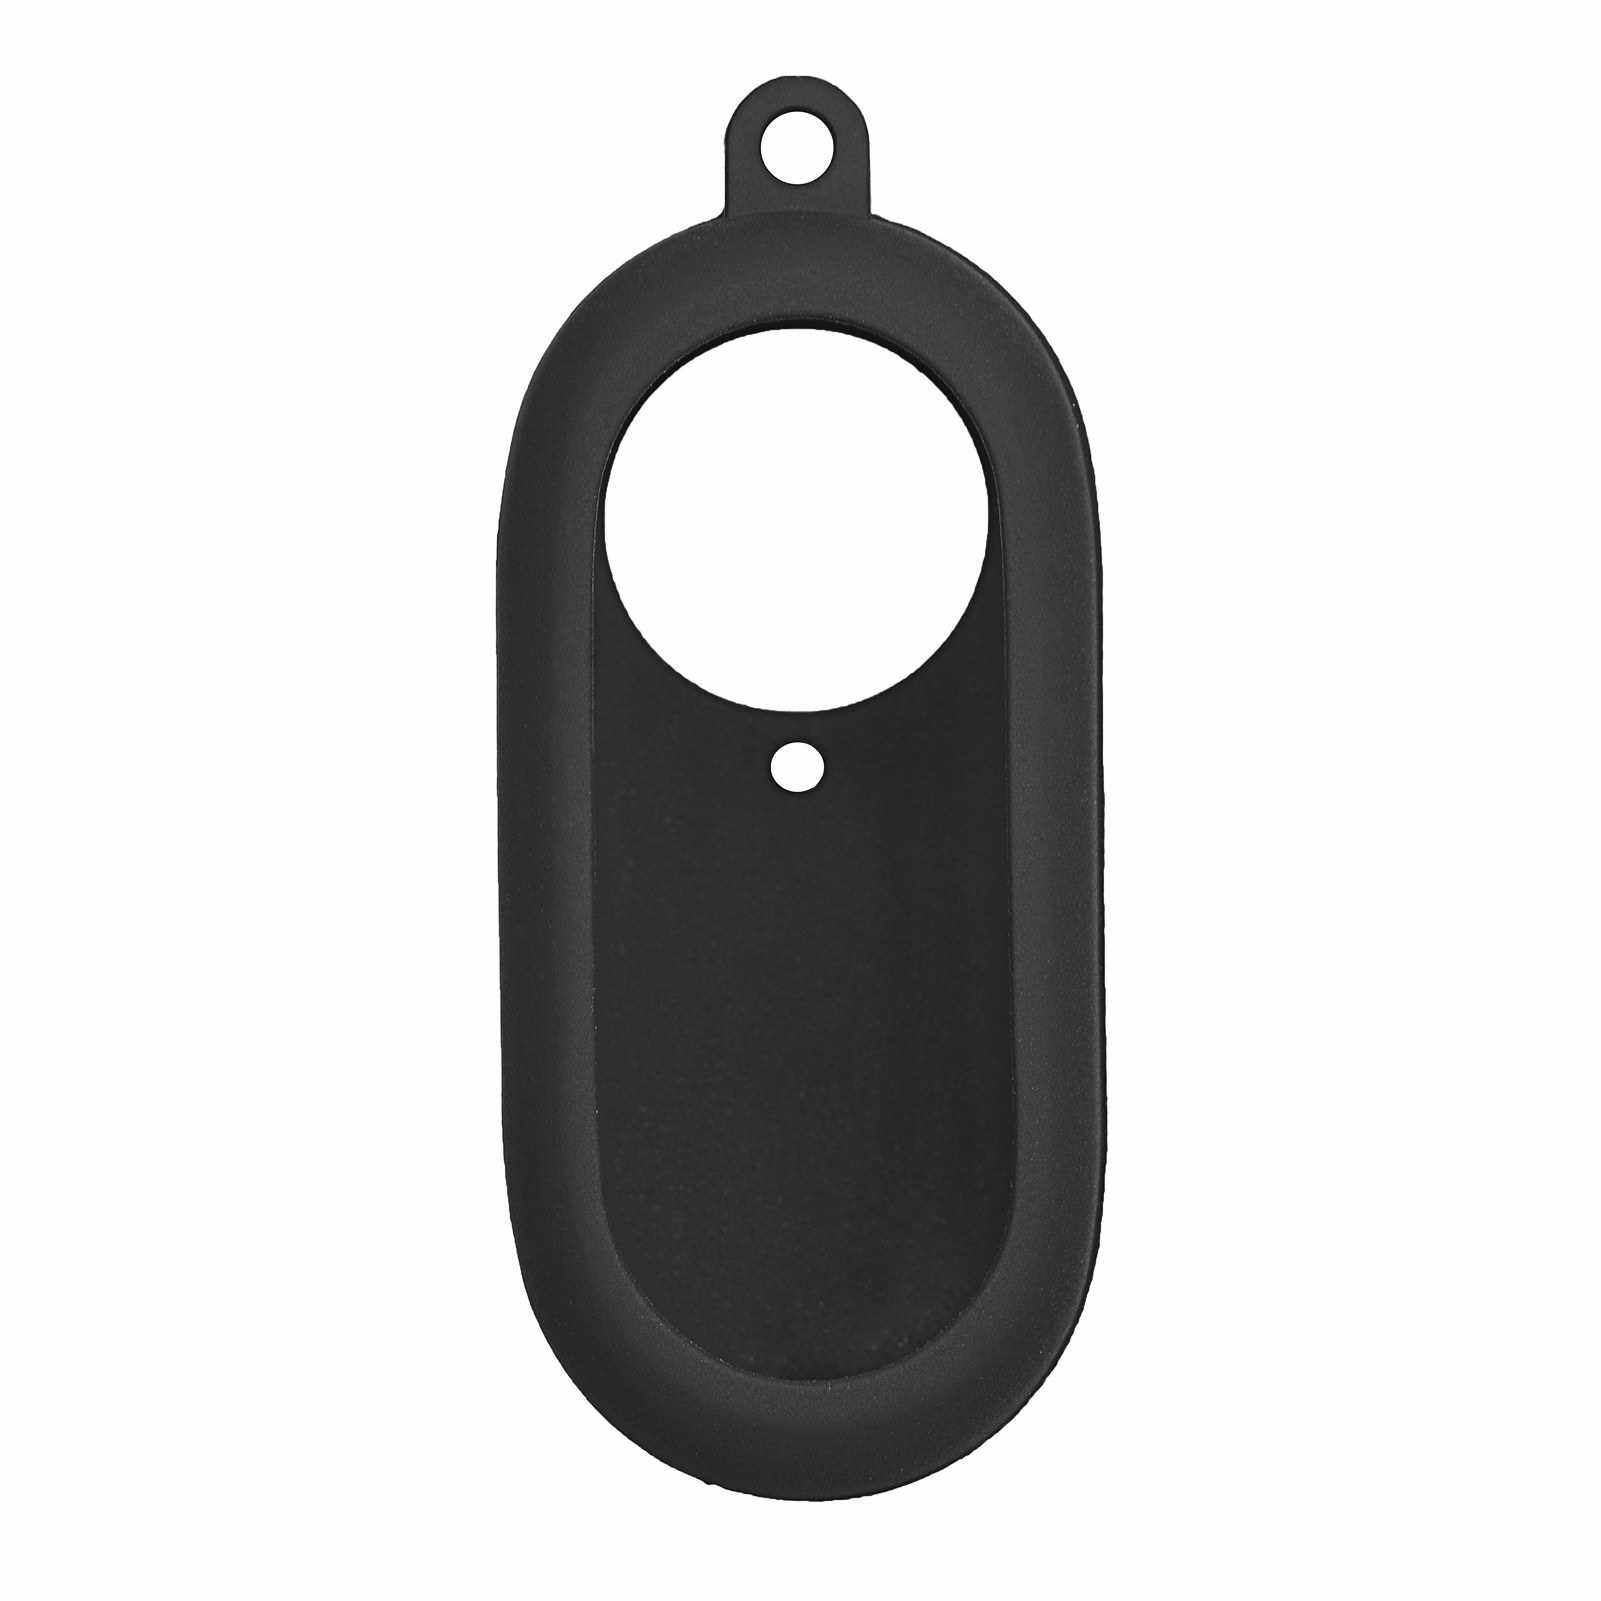 Camera Sleeve Silicone Cover Protective Holder Replacement for Insta360 Go 2 Camera (Black)